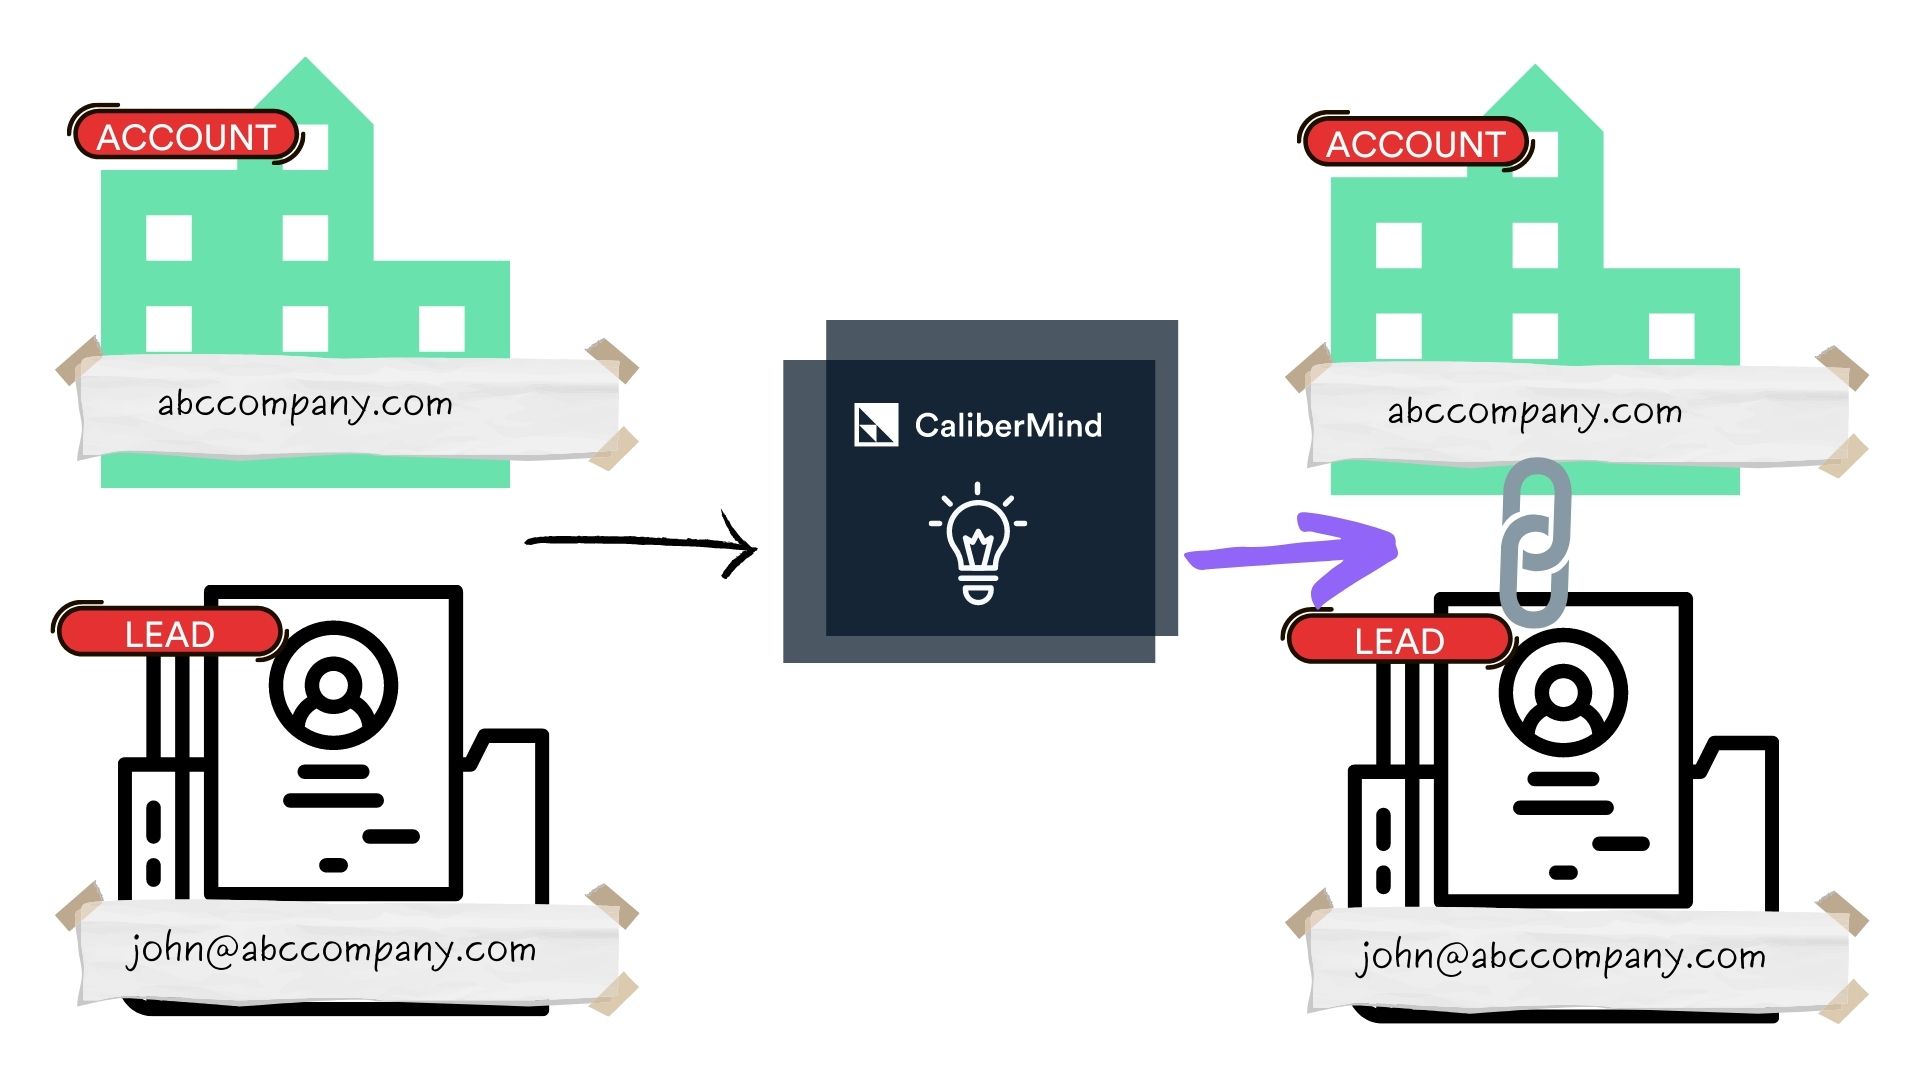 CaliberMind uses complex logic to map accounts to leads